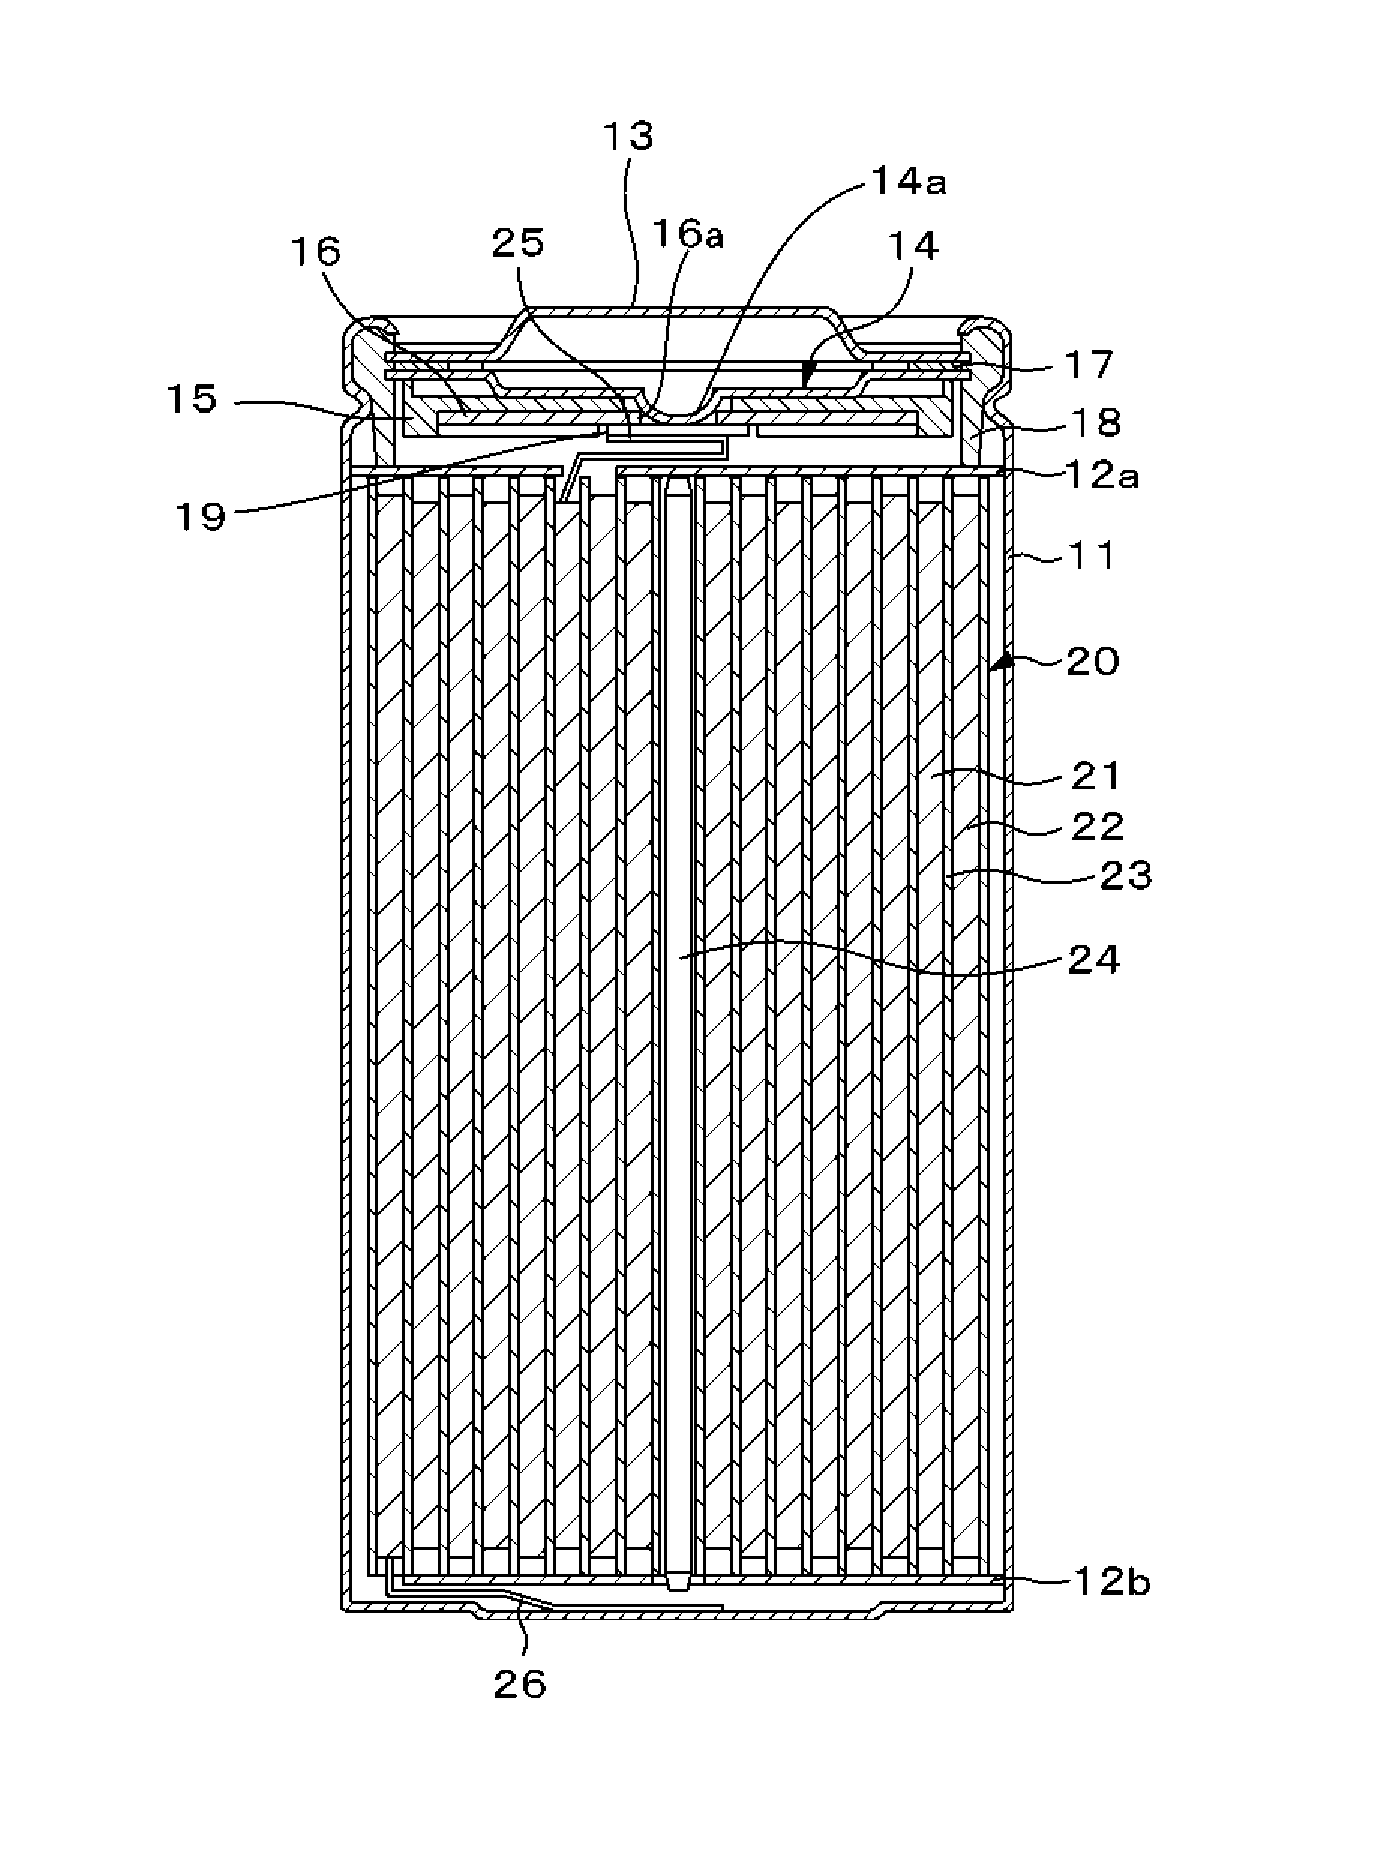 Battery, battery pack, electronic apparatus, electric vehicle, electrical storage apparatus and electricity system